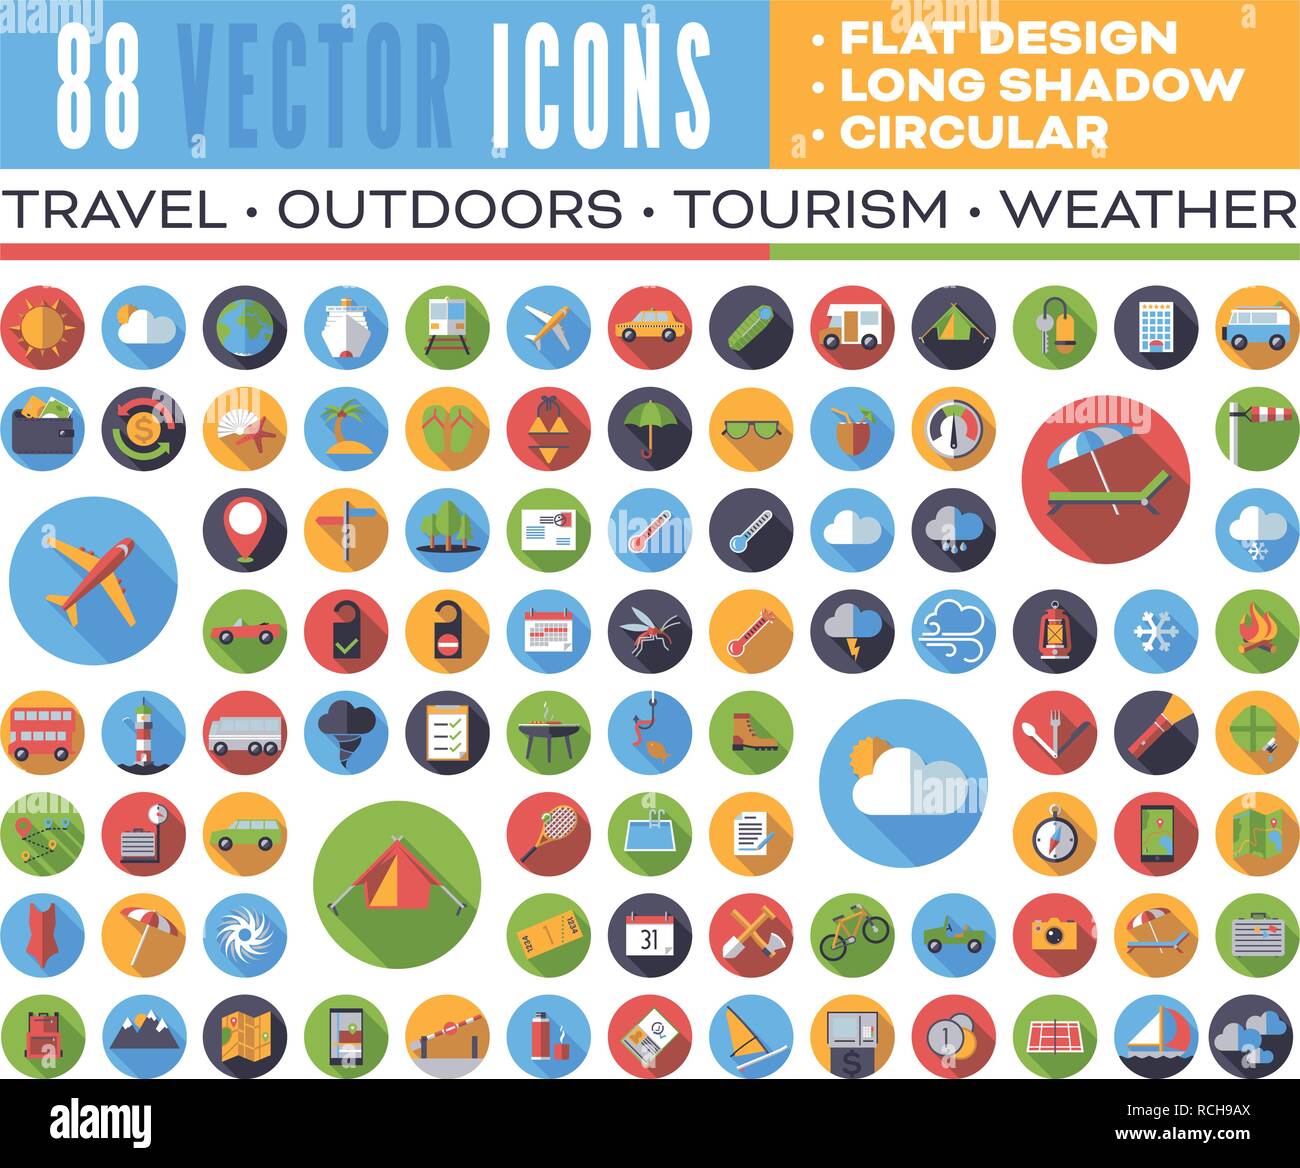 Set of 88 flat design long shadow round vector icons for web, print, apps, interface design: travel, outdoors, tourism, weather. Stock Vector